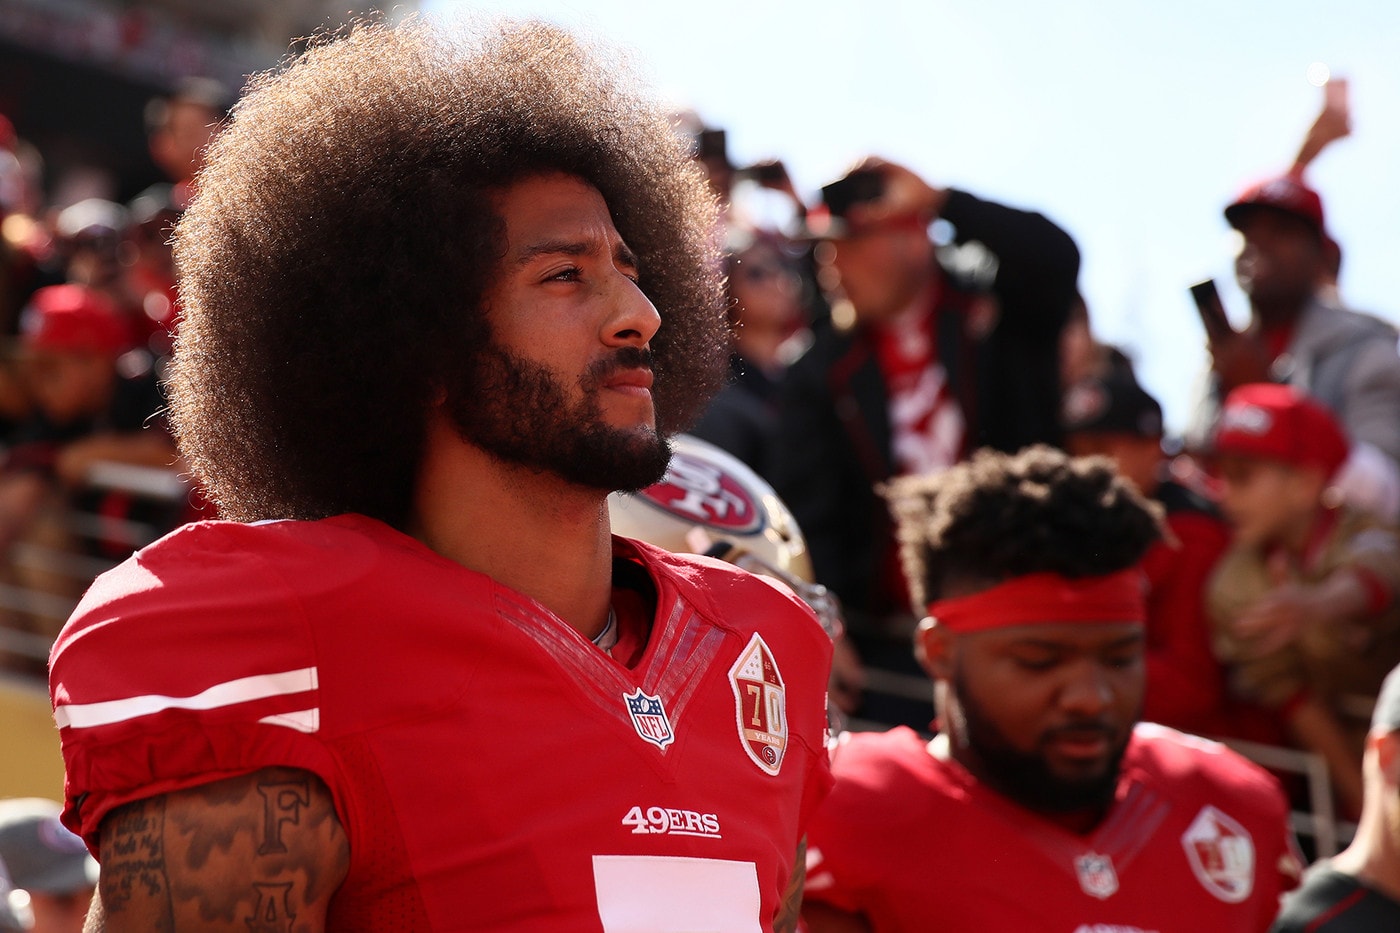 nike colin kaepernick just do it ad controversy reaction backlash social media twitter social justice analyst stock prices 4 points down dow jones tweet support pledge political kneel knee pledge allegiance